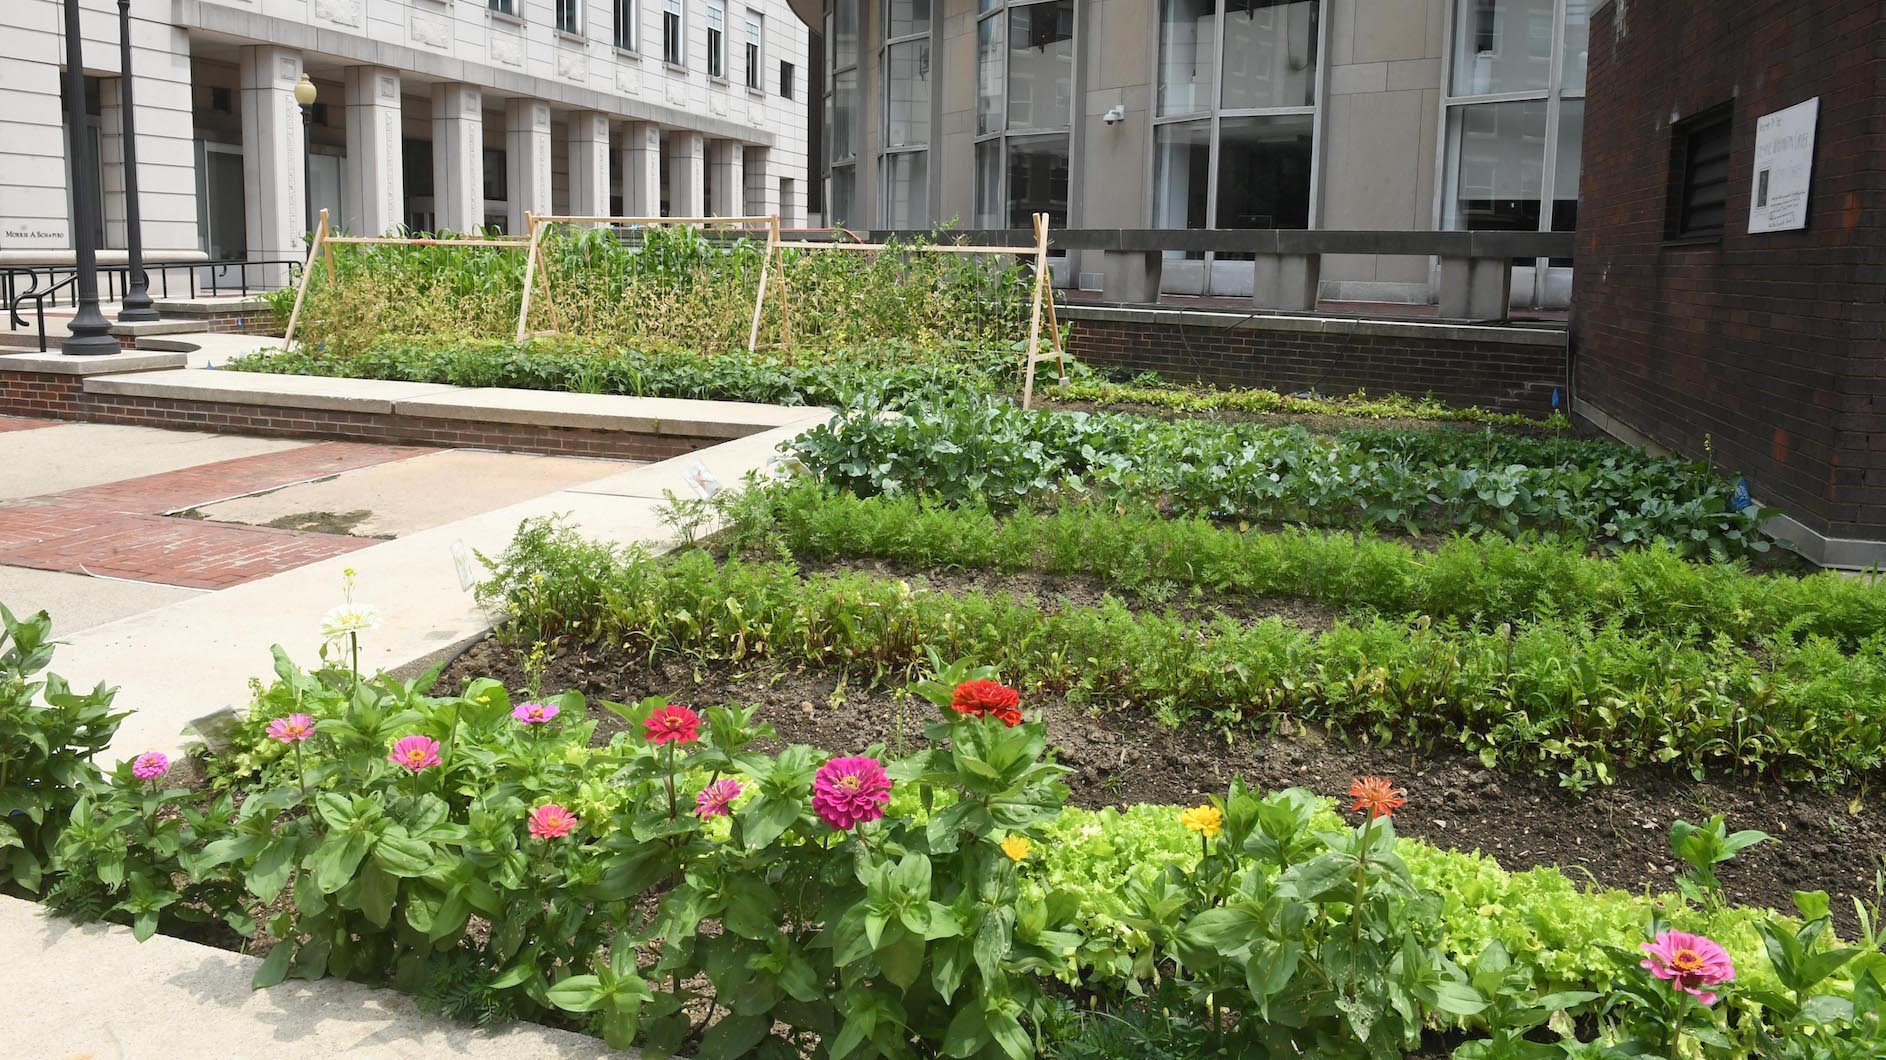 Flower and vegetable garden on Columbia University's campus